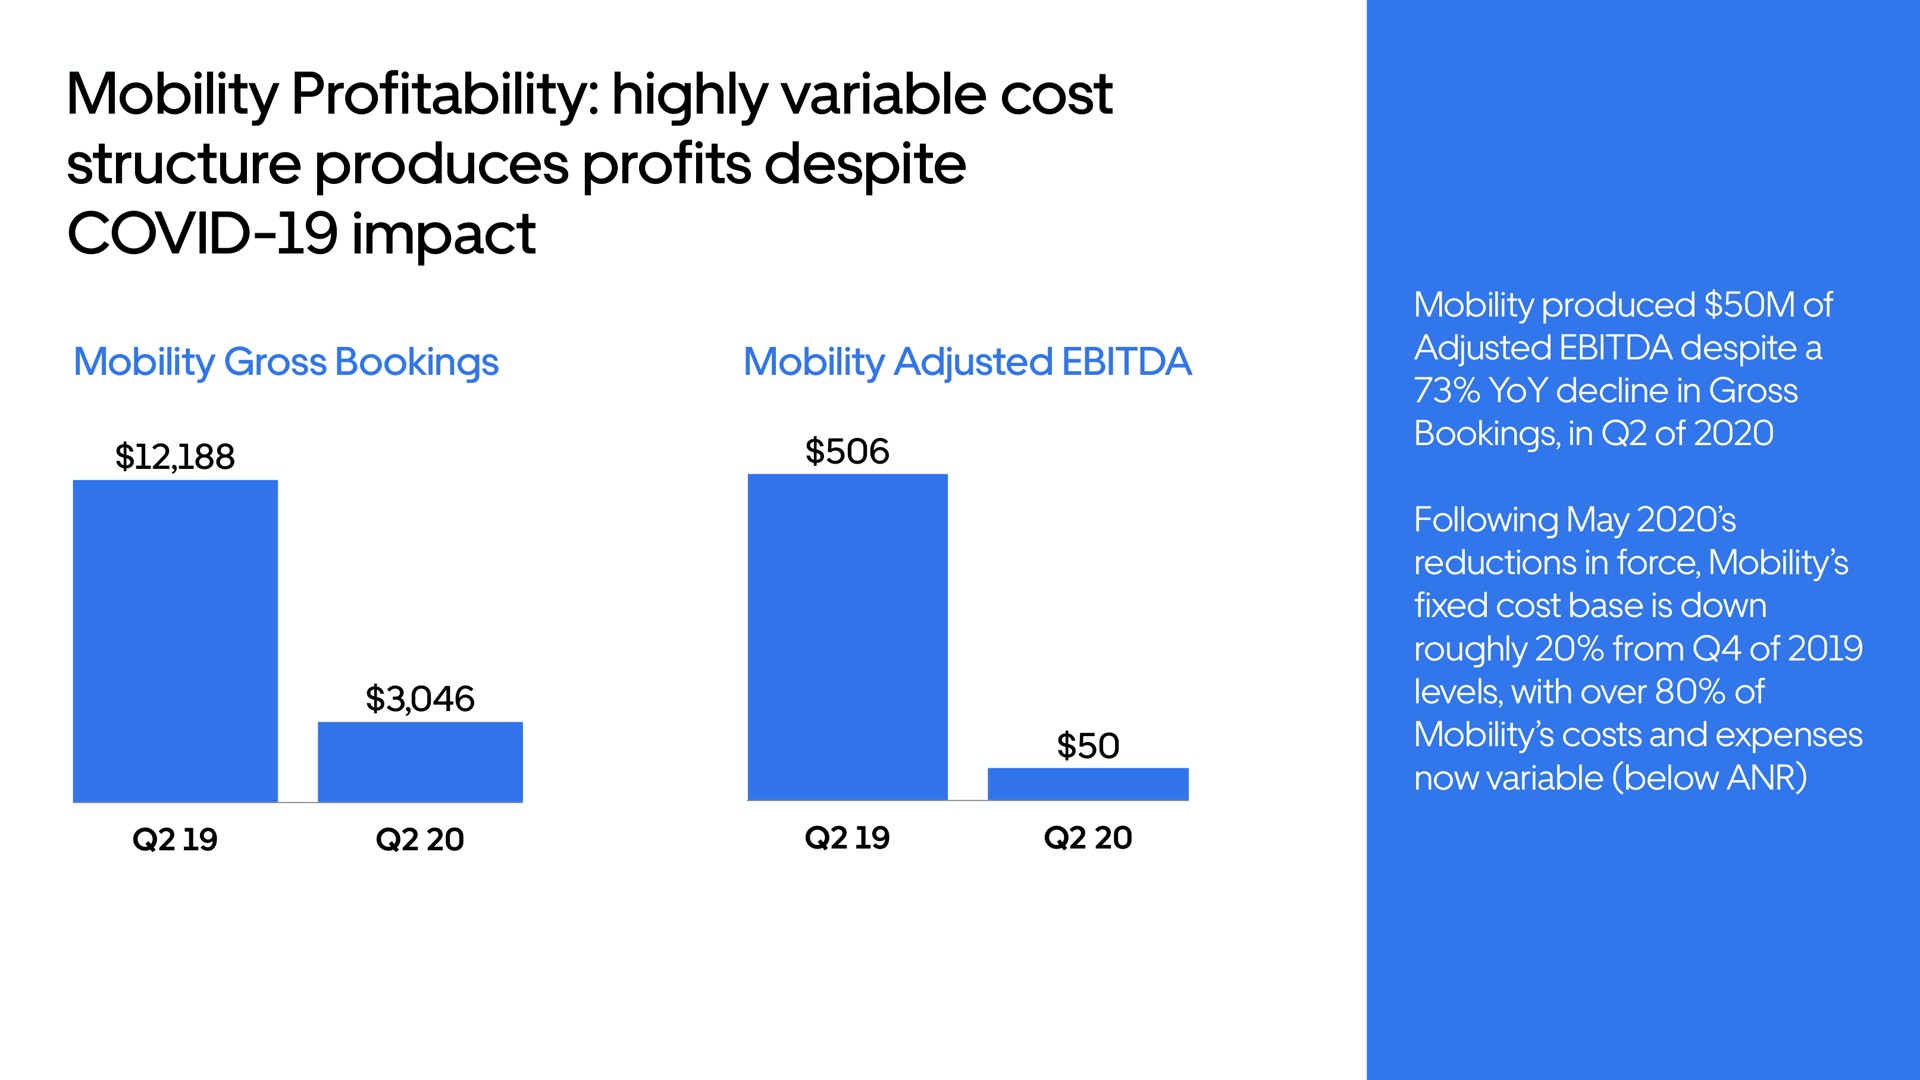 mobility profitability highly variable cost structure produces profits despite covid impact | Uber